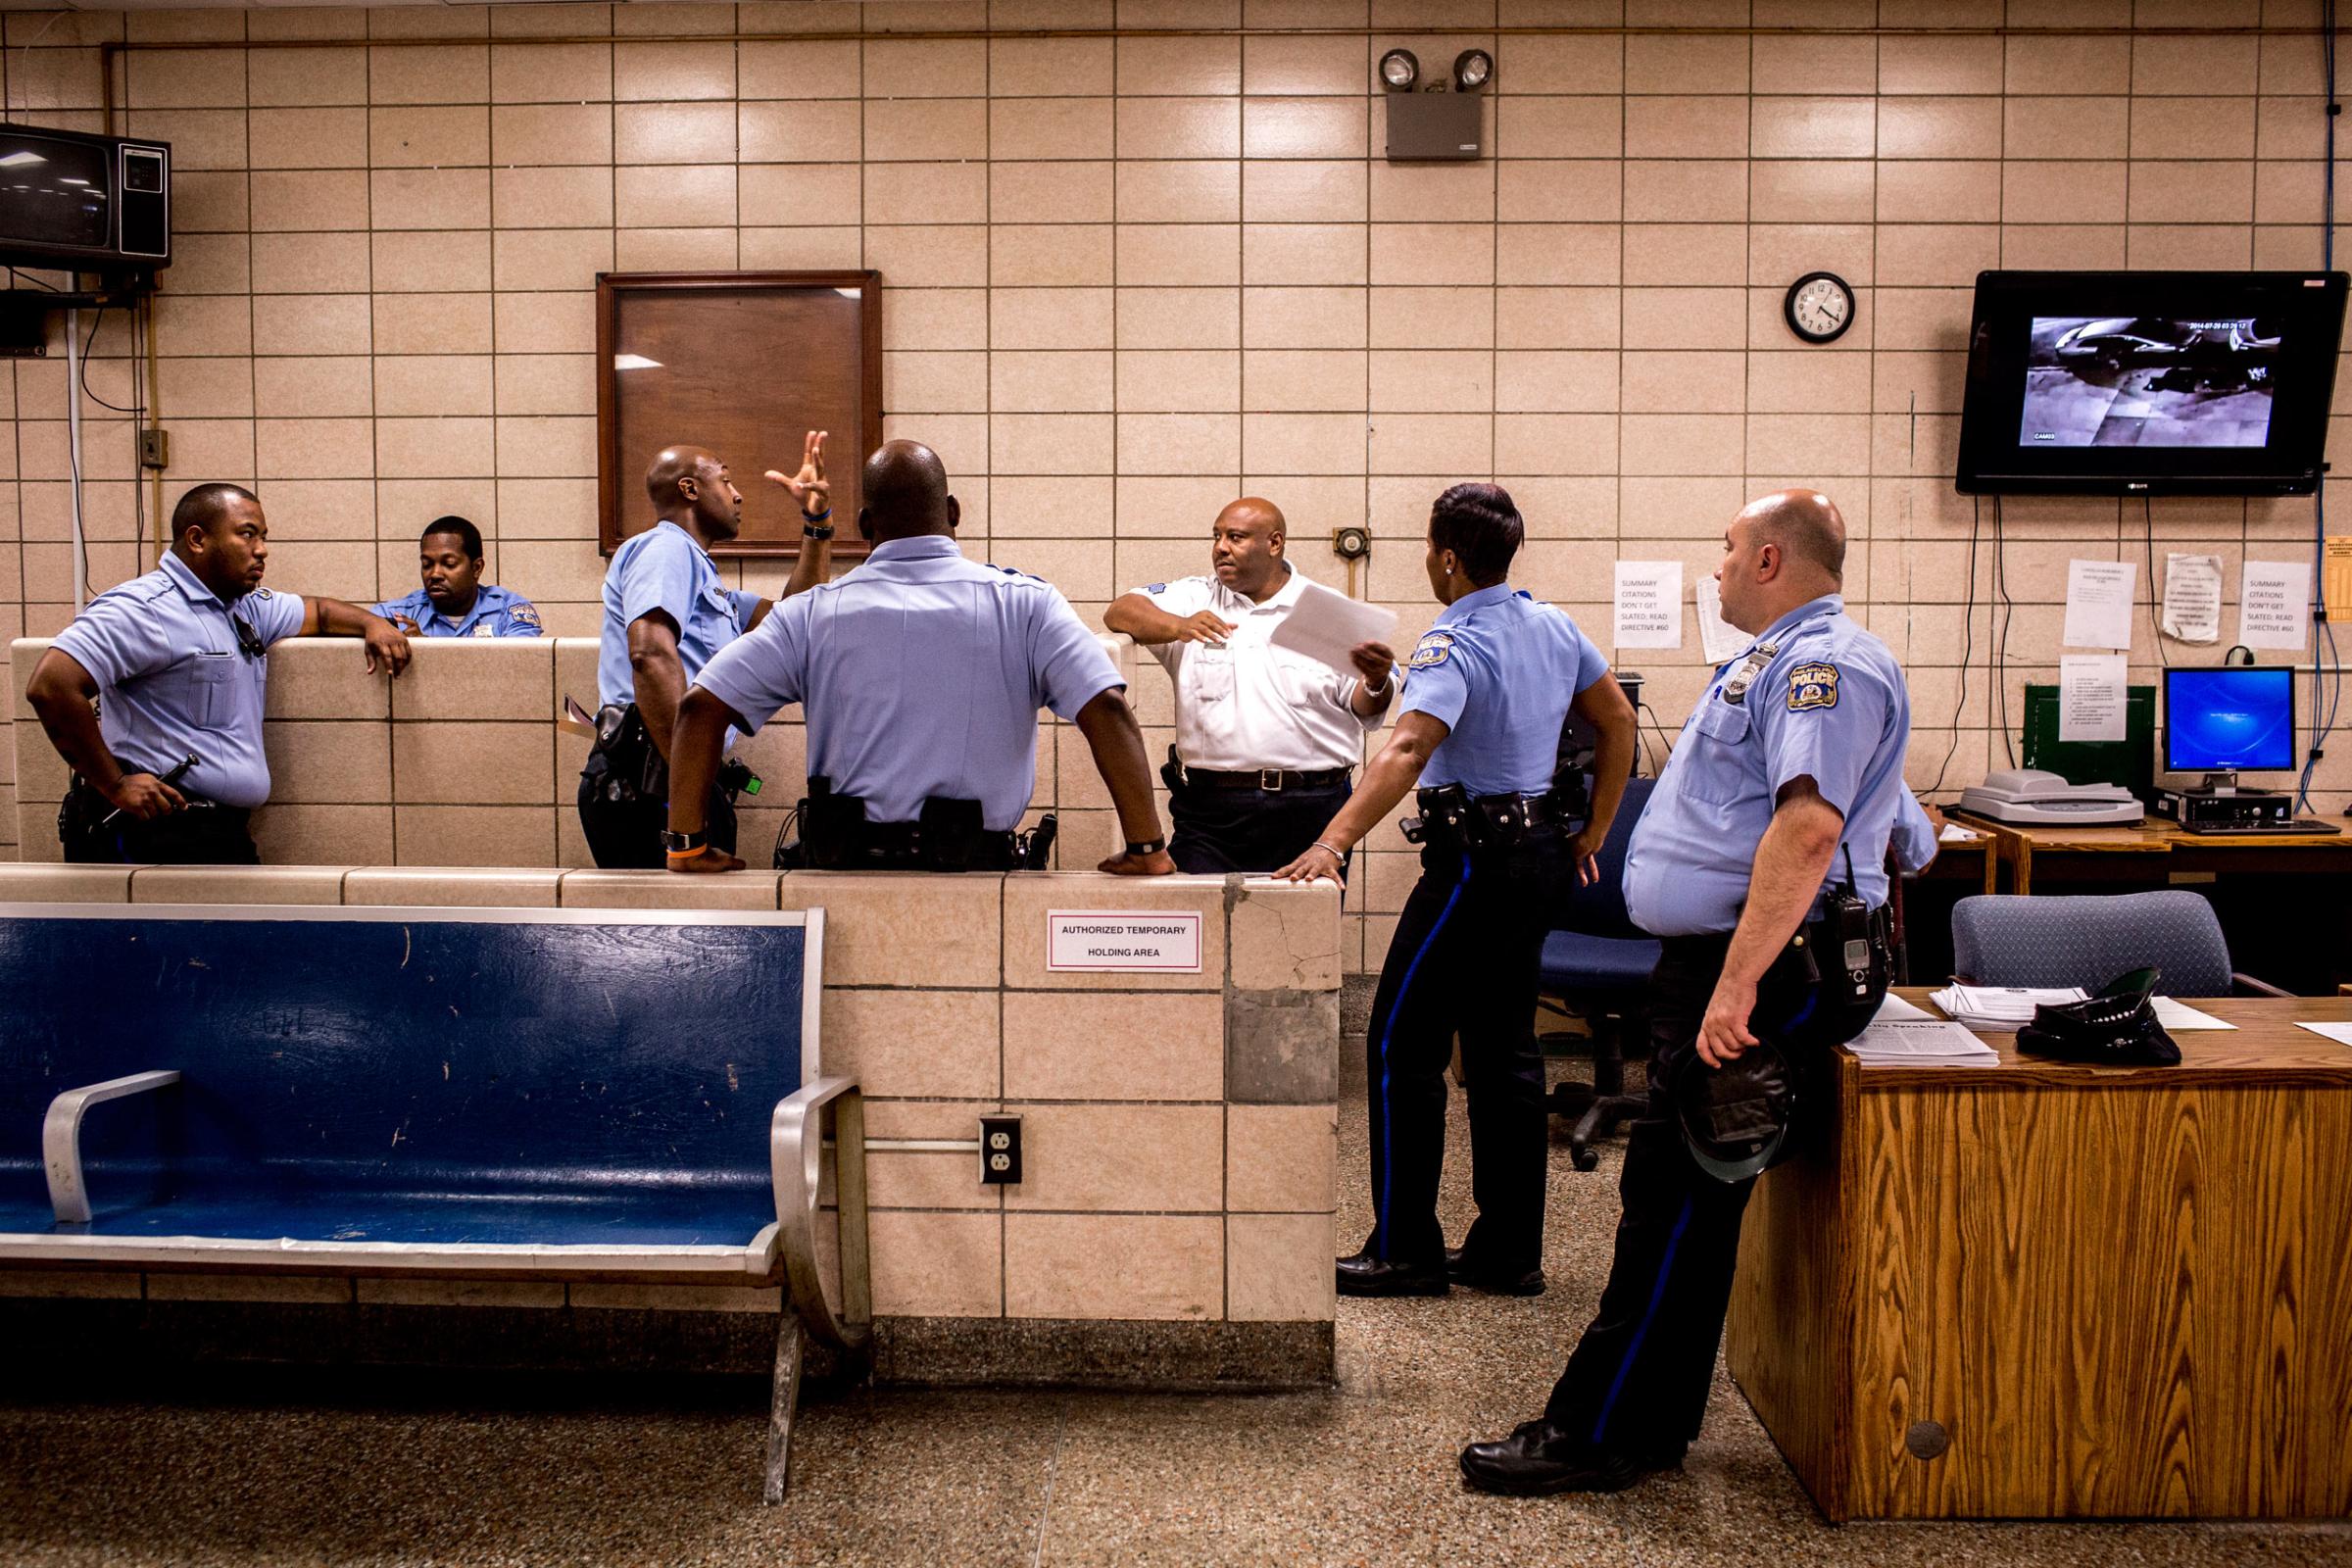 July 27th, 2015. Philadelphia, PA. Sergeant Rodney Linder, center, speaks to a group of officers before they head out on patrol for the evening. (Natalie Keyssar)